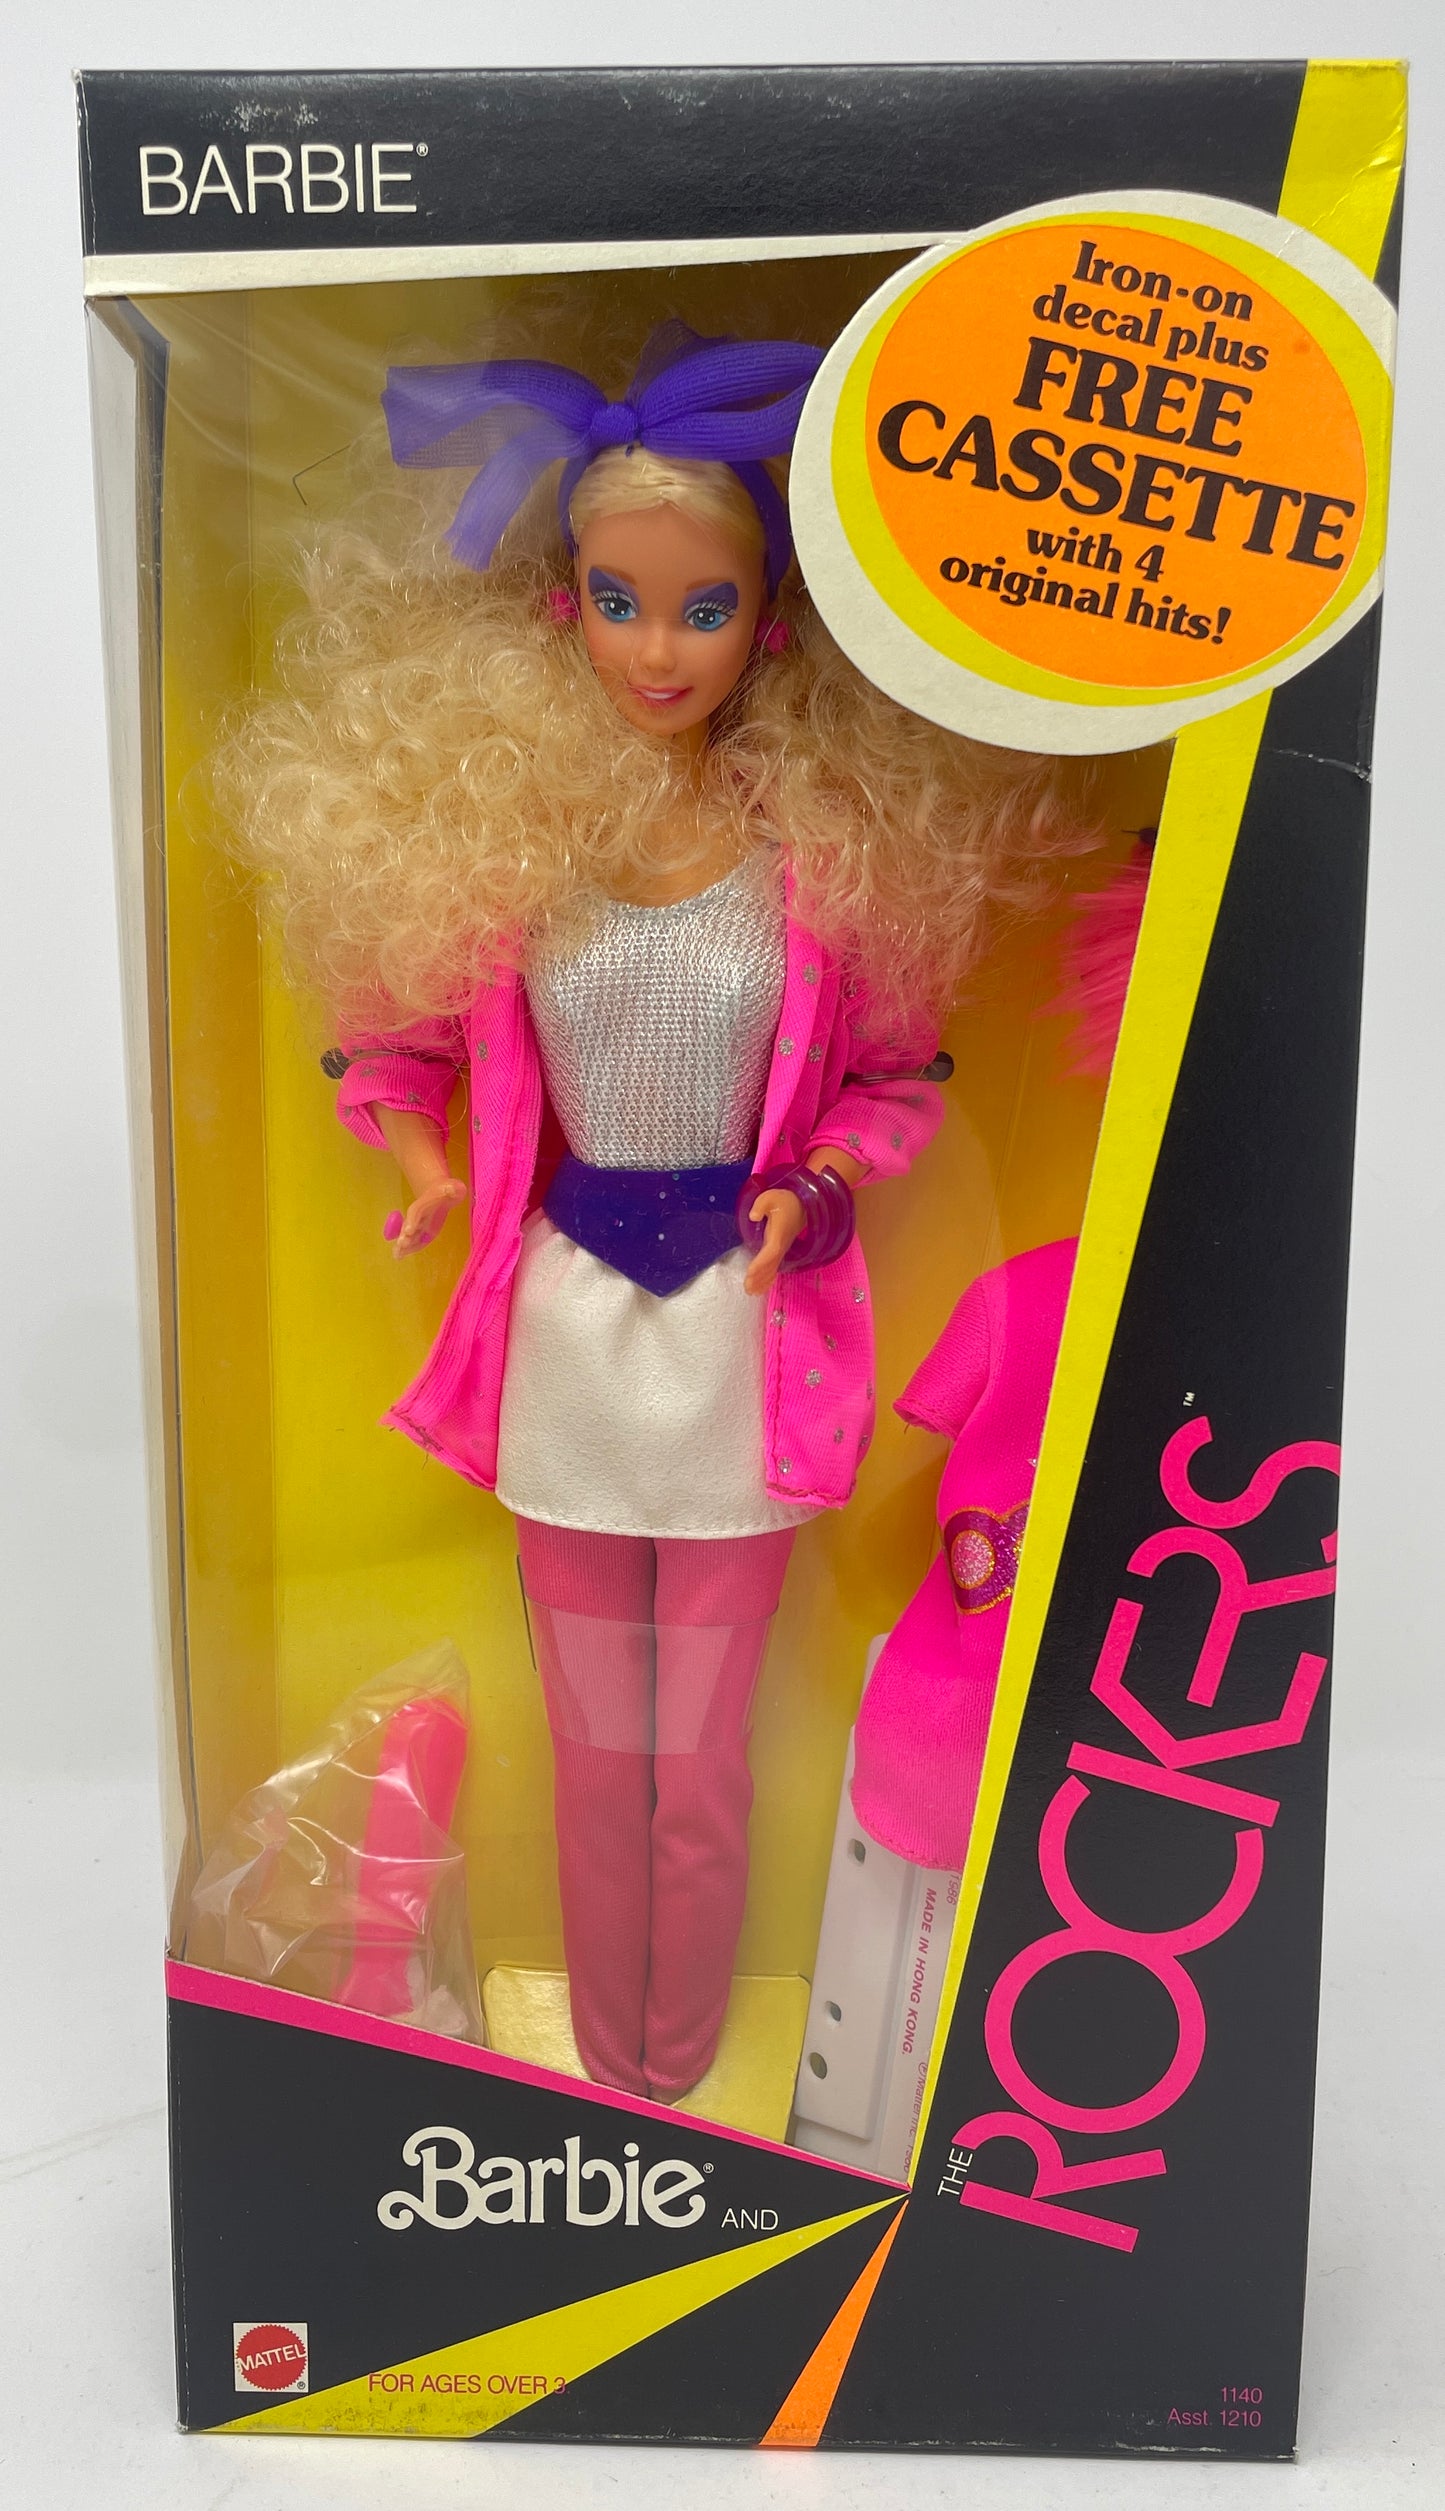 BARBIE AND THE ROCKERS - BARBIE #1140 - MATTEL 1985 (3 OF 3)